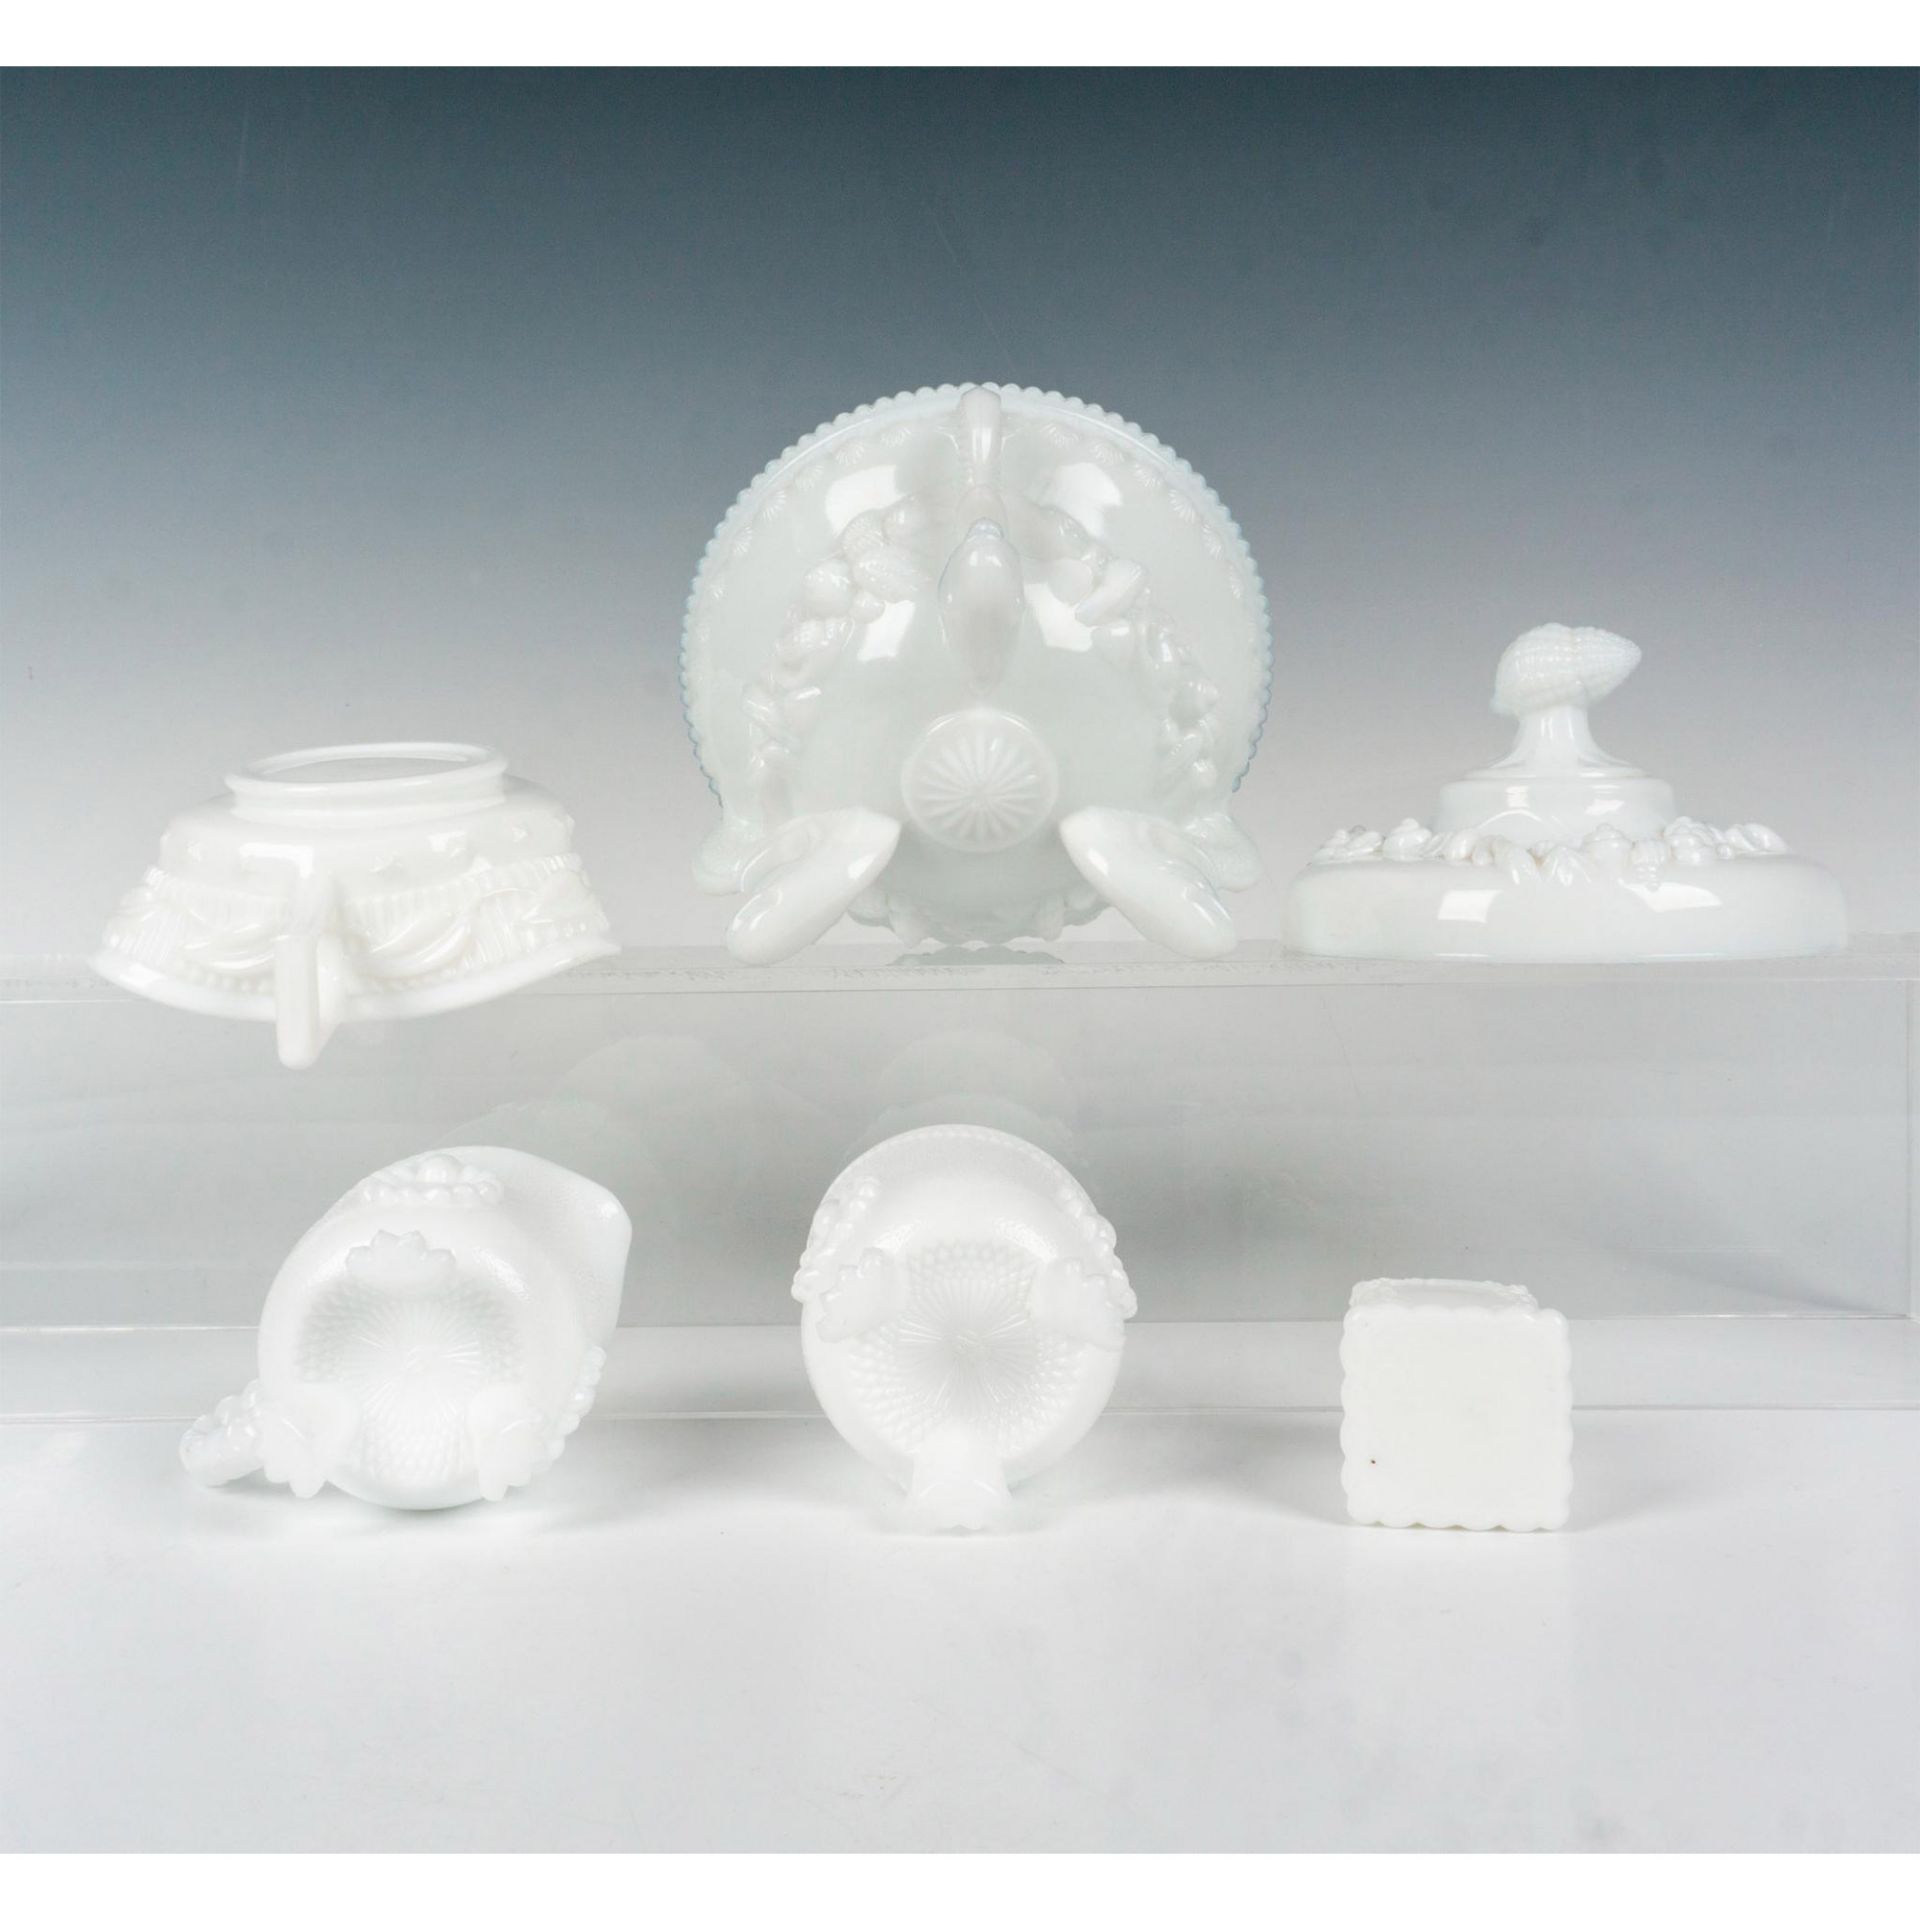 5pc Vintage Milk Glass Tableware Grouping - Image 3 of 3